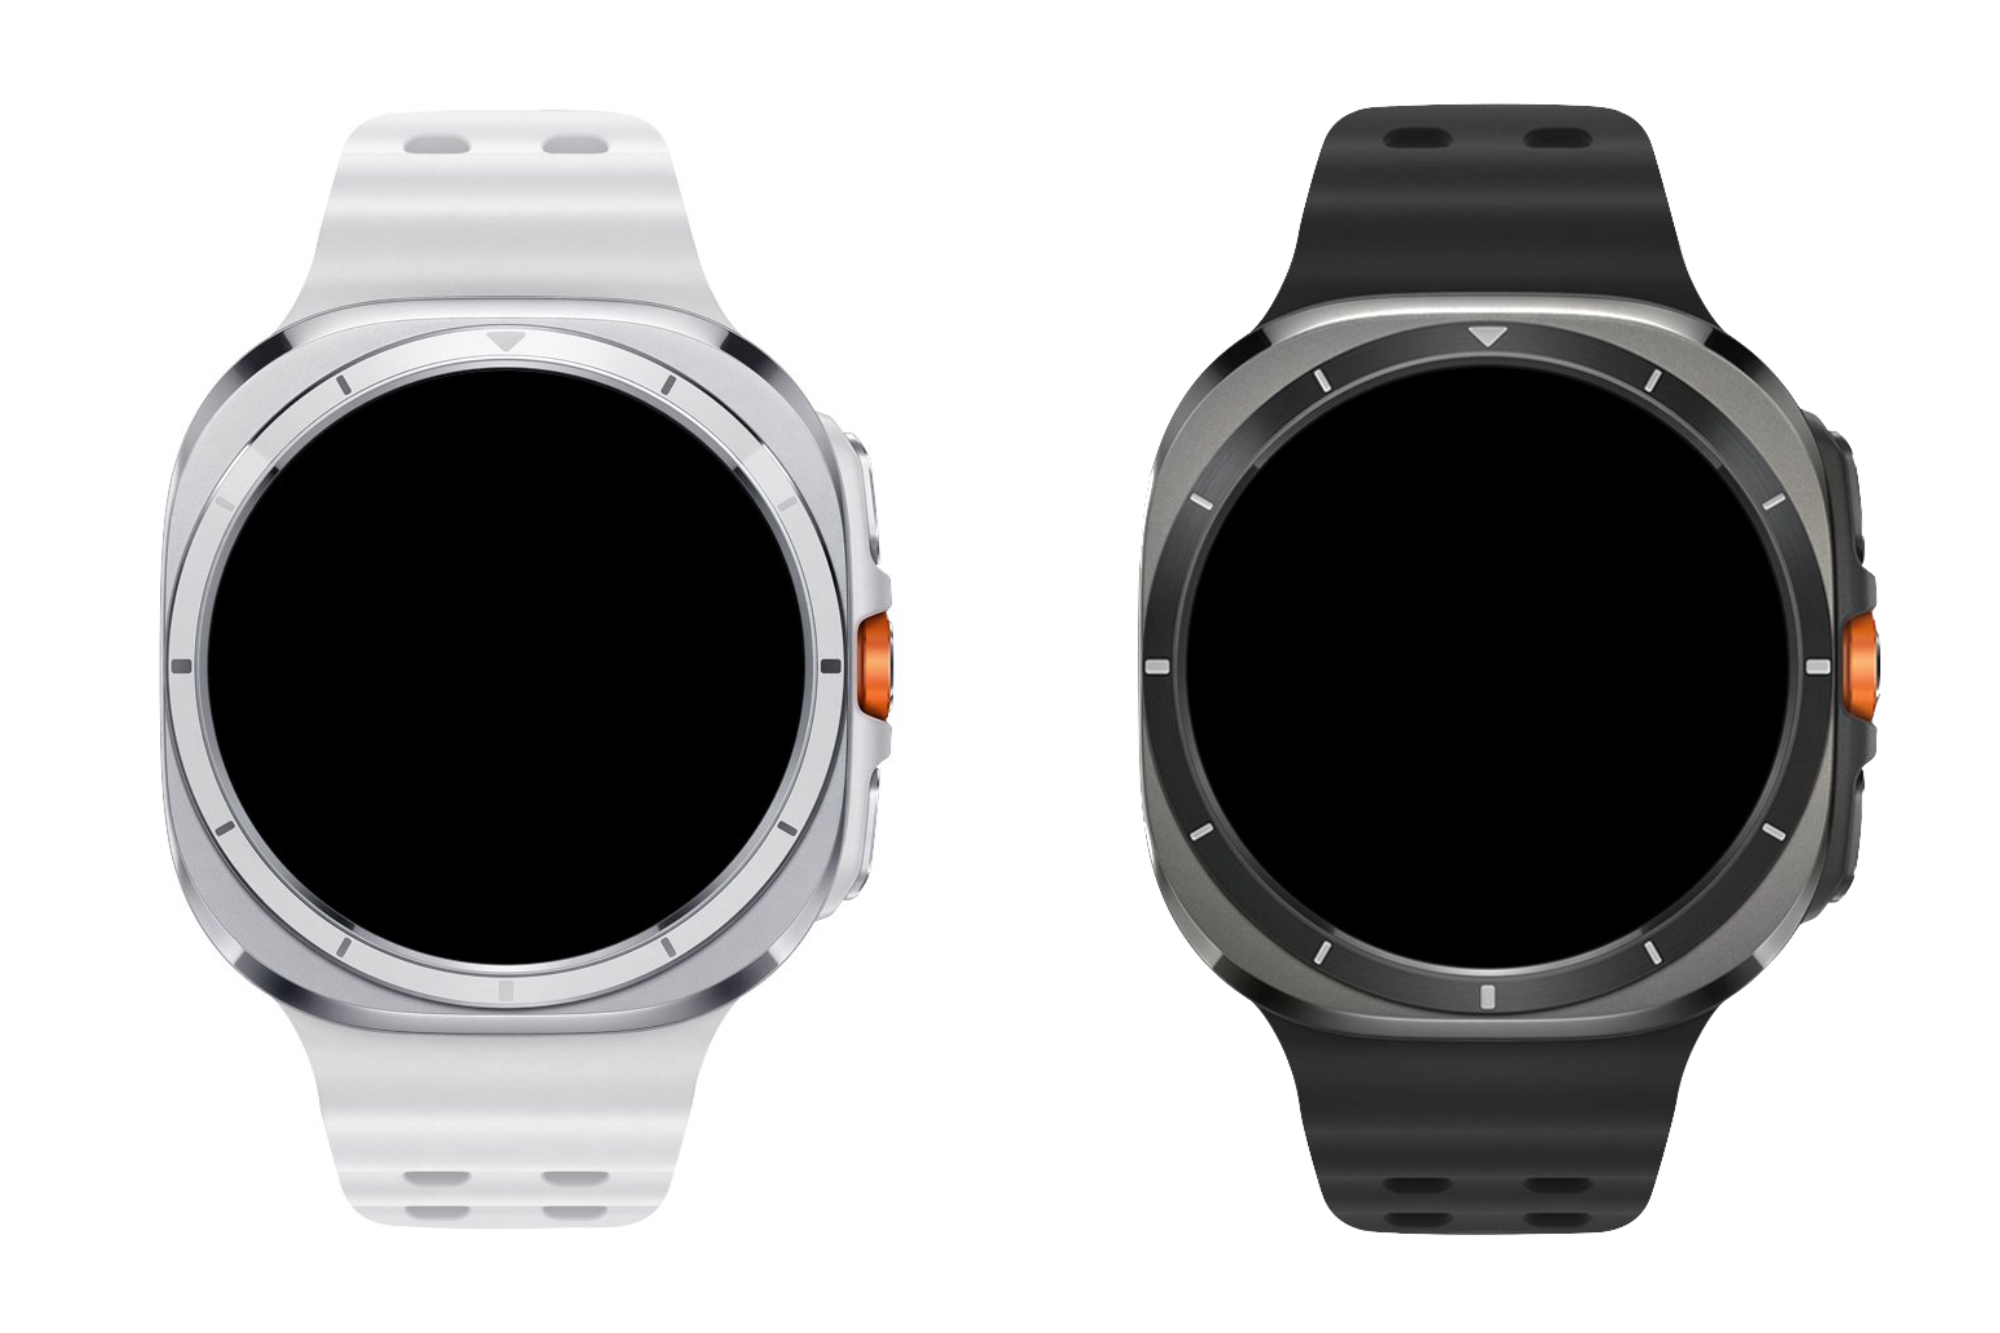 Renders of the Galaxy Watch Ultra in white and black.